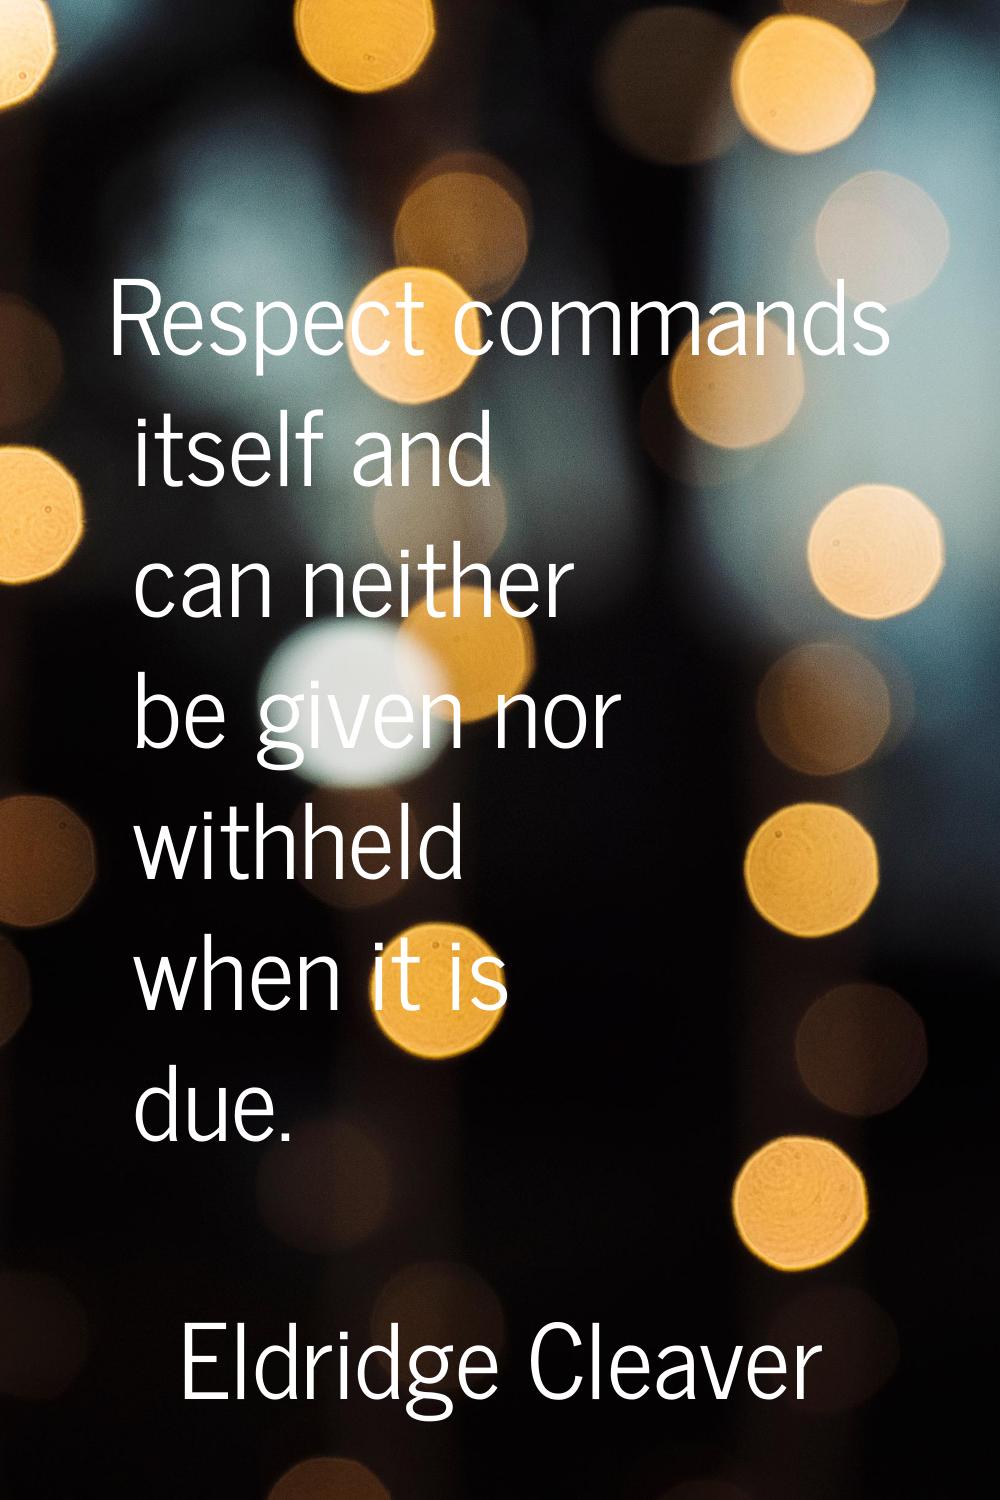 Respect commands itself and can neither be given nor withheld when it is due.